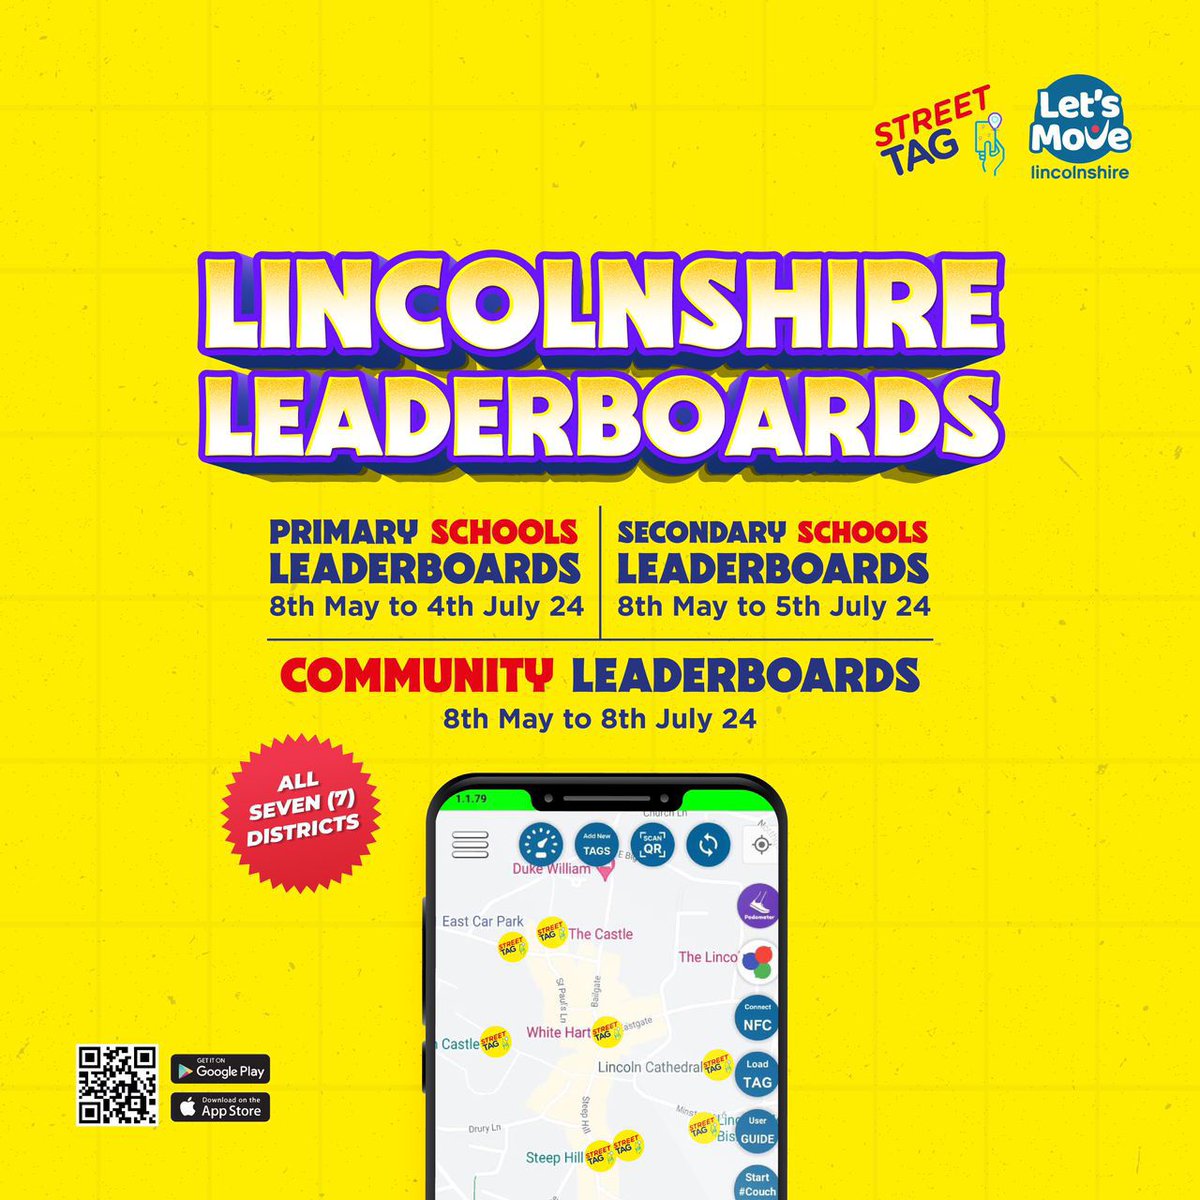 EXCITING ANNOUNCEMENT LINCOLNSHIRE!!! 🎉A New Season has started! Get started and get and stay active, connected and make Lincolnshire the healthiest and most vibrant community together! 🌈✨ @ActiveLincs @LetsMoveLincs